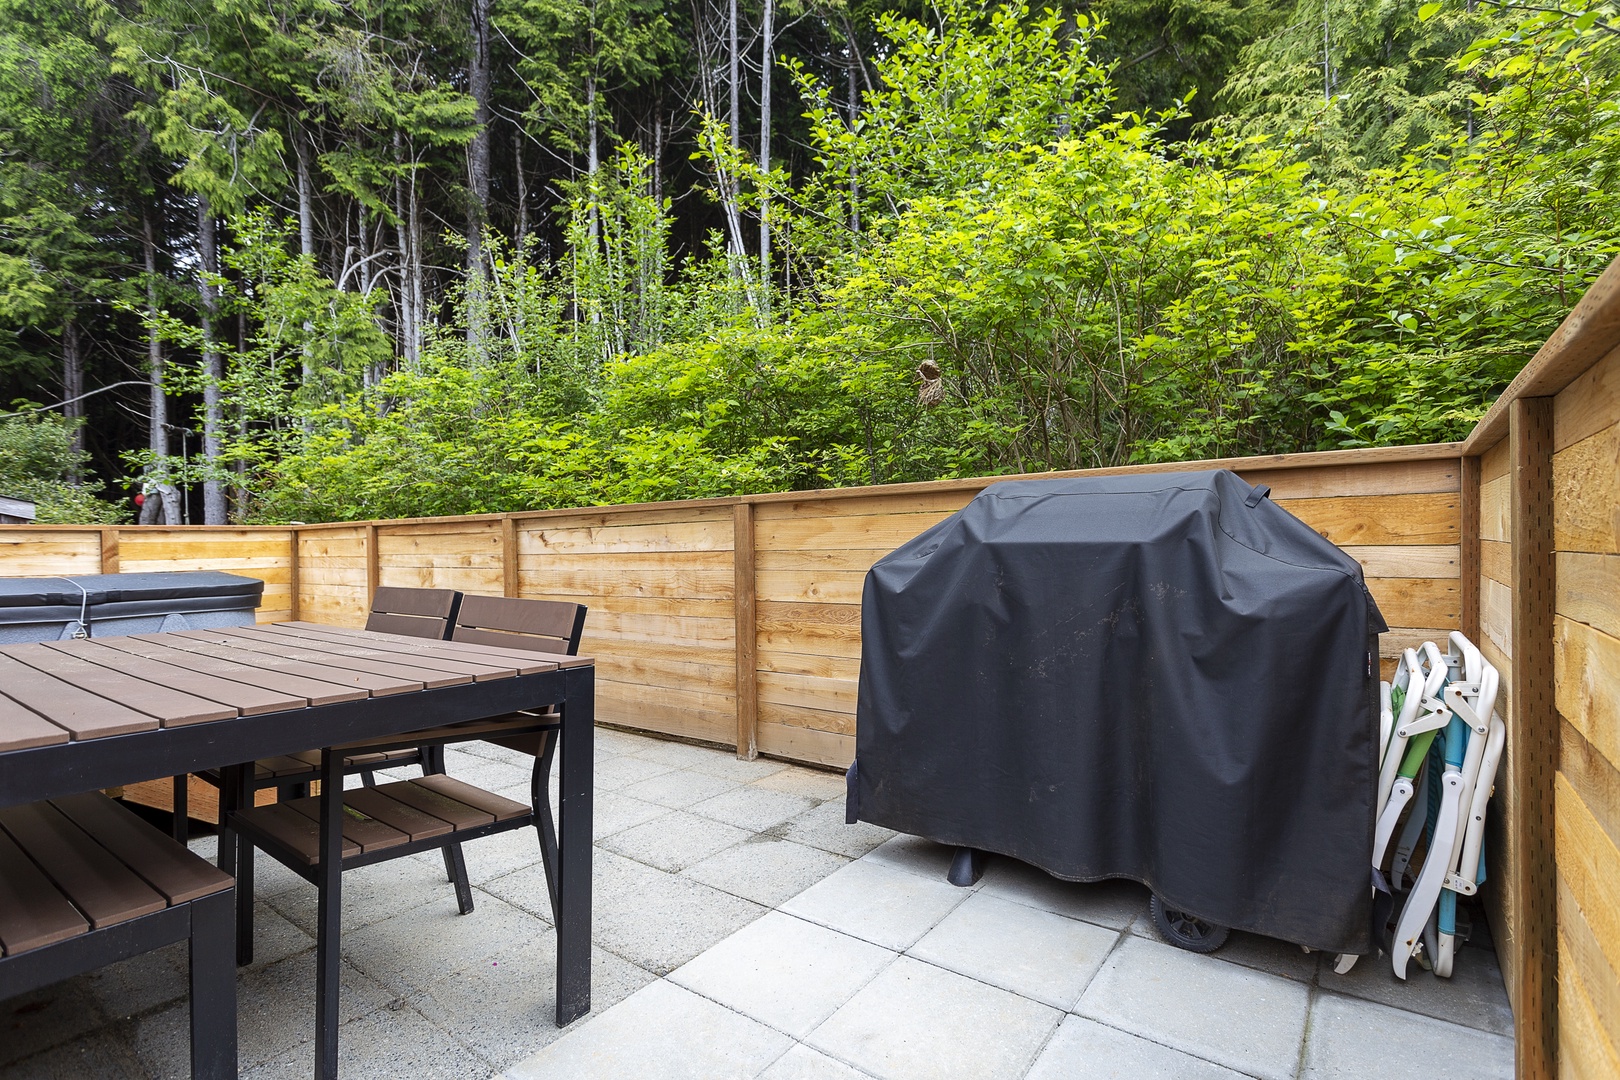 Private back patio with bbq hot tub and outdoor seating